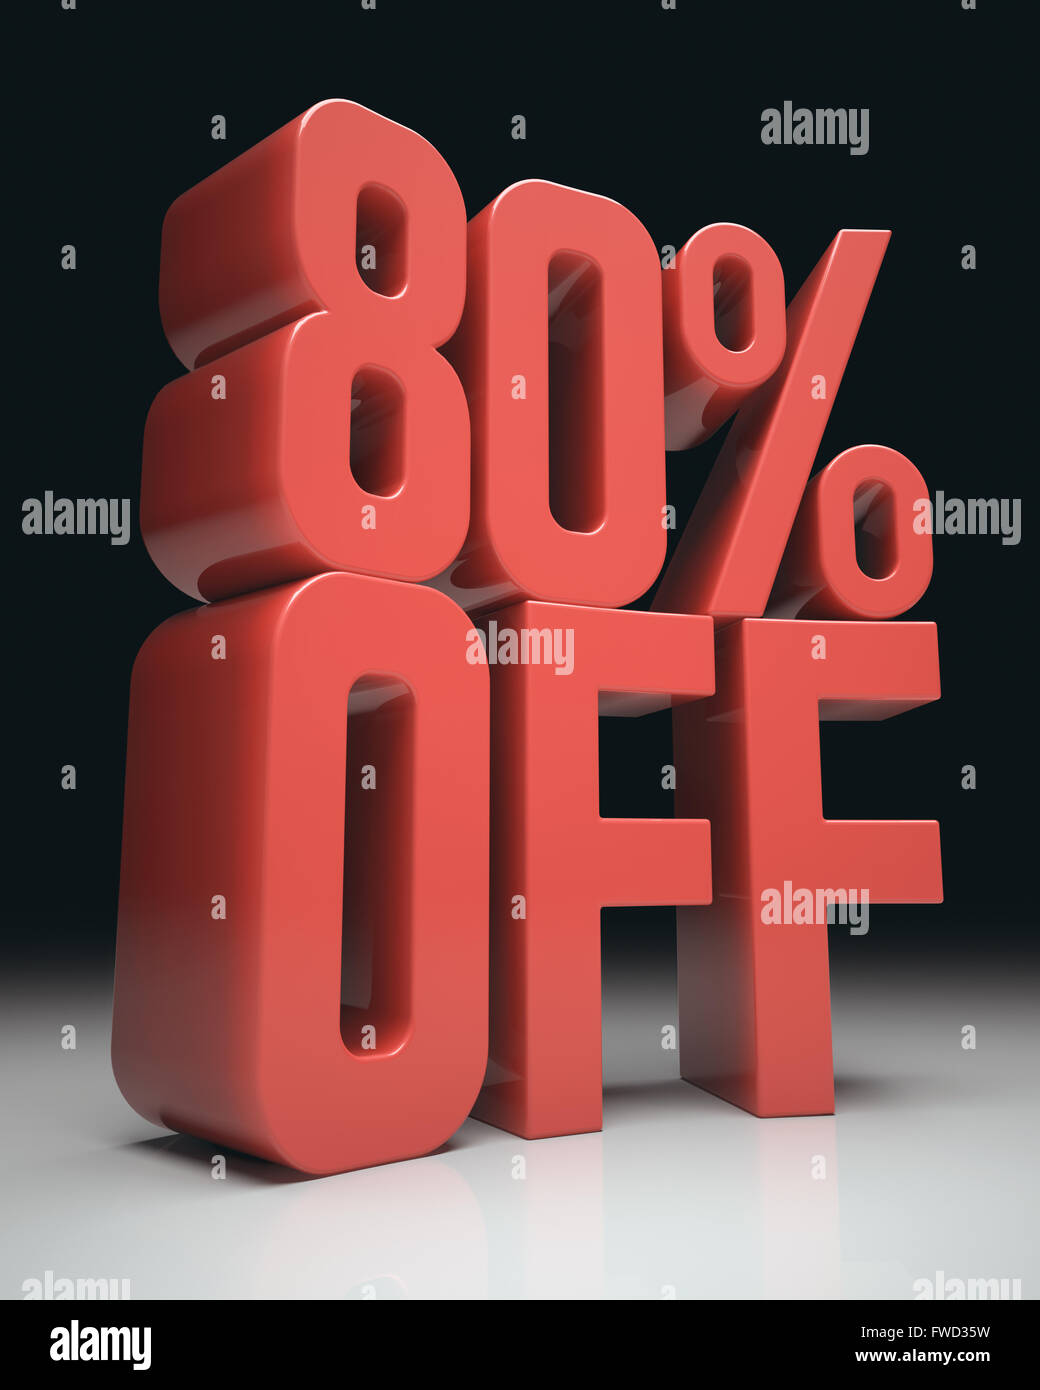 3D image concept. Discount percentage in red on white surface and black background. Clipping path included. Stock Photo